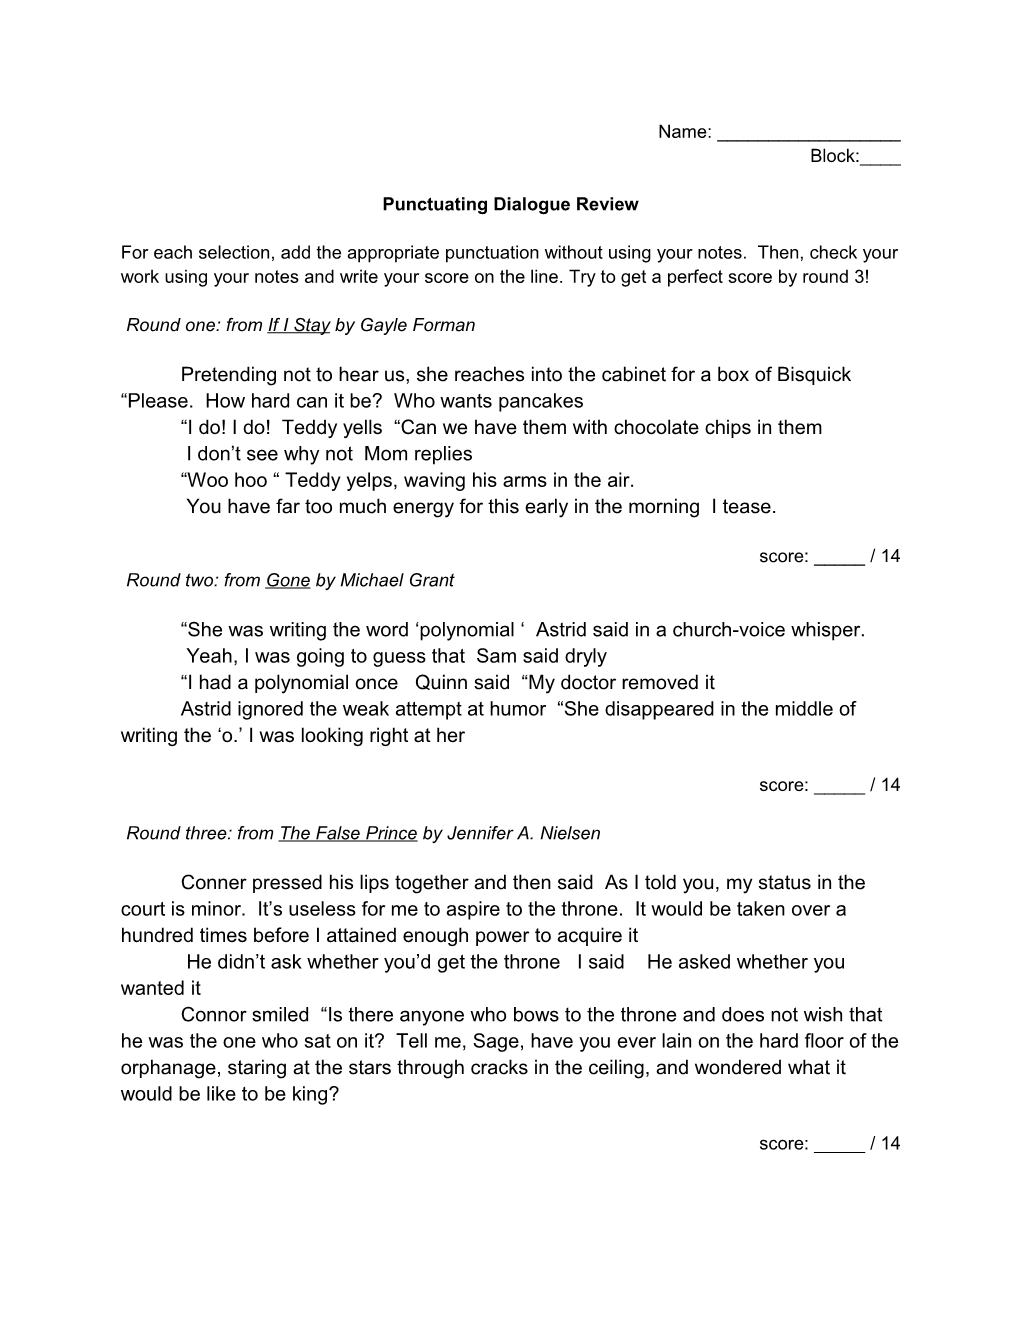 Punctuating Dialogue Review